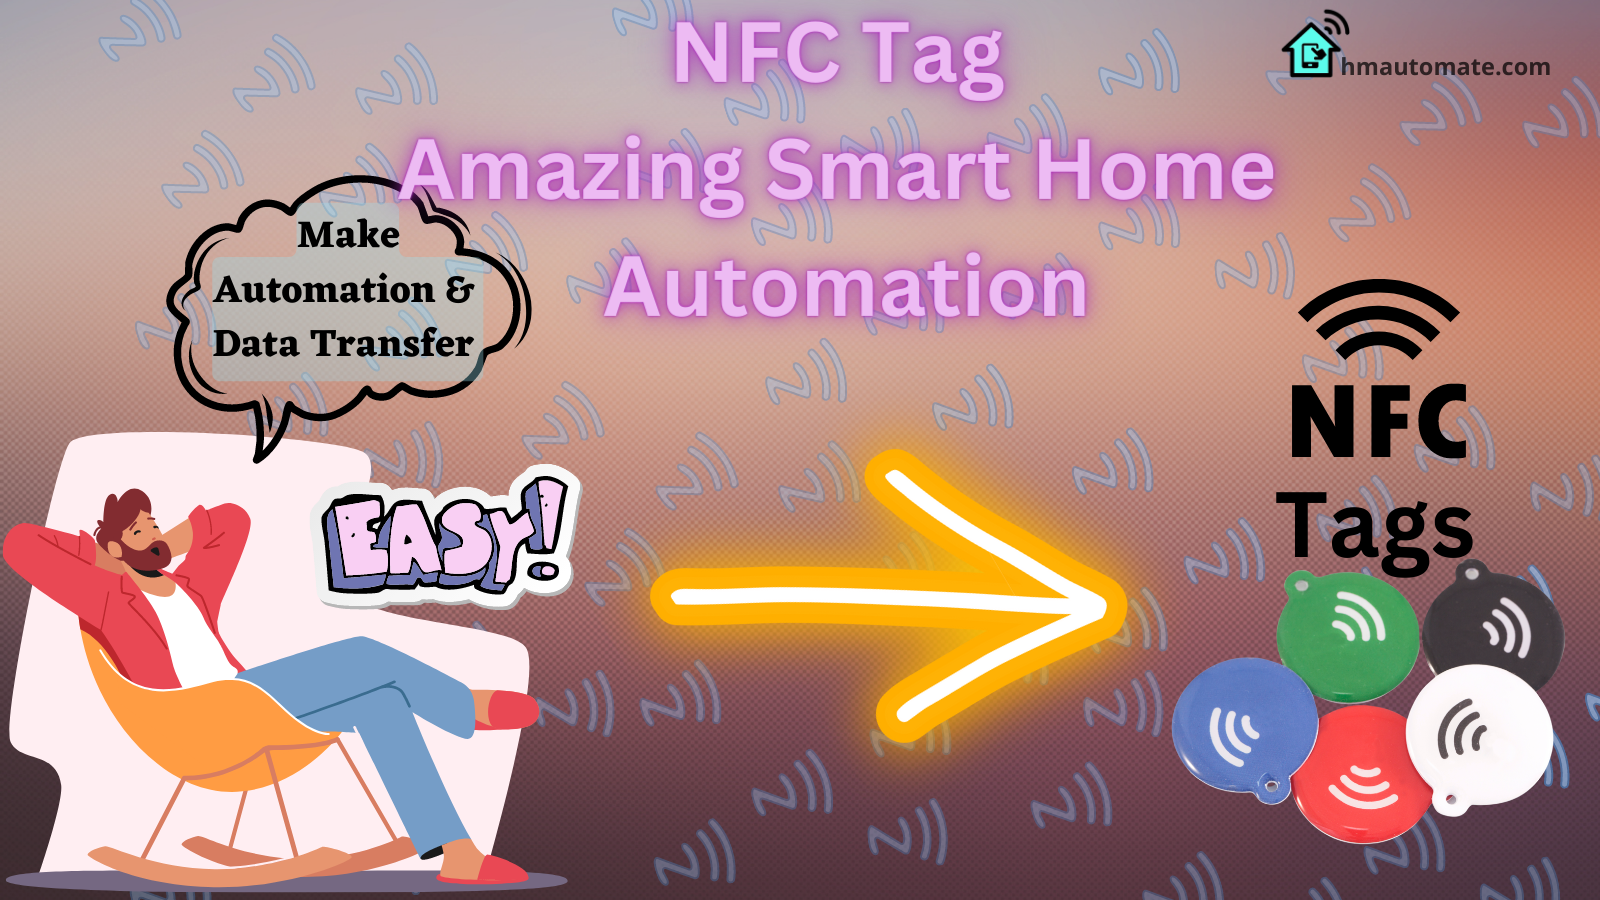 NFC Tag Reader – What Are They? How To Use Them?